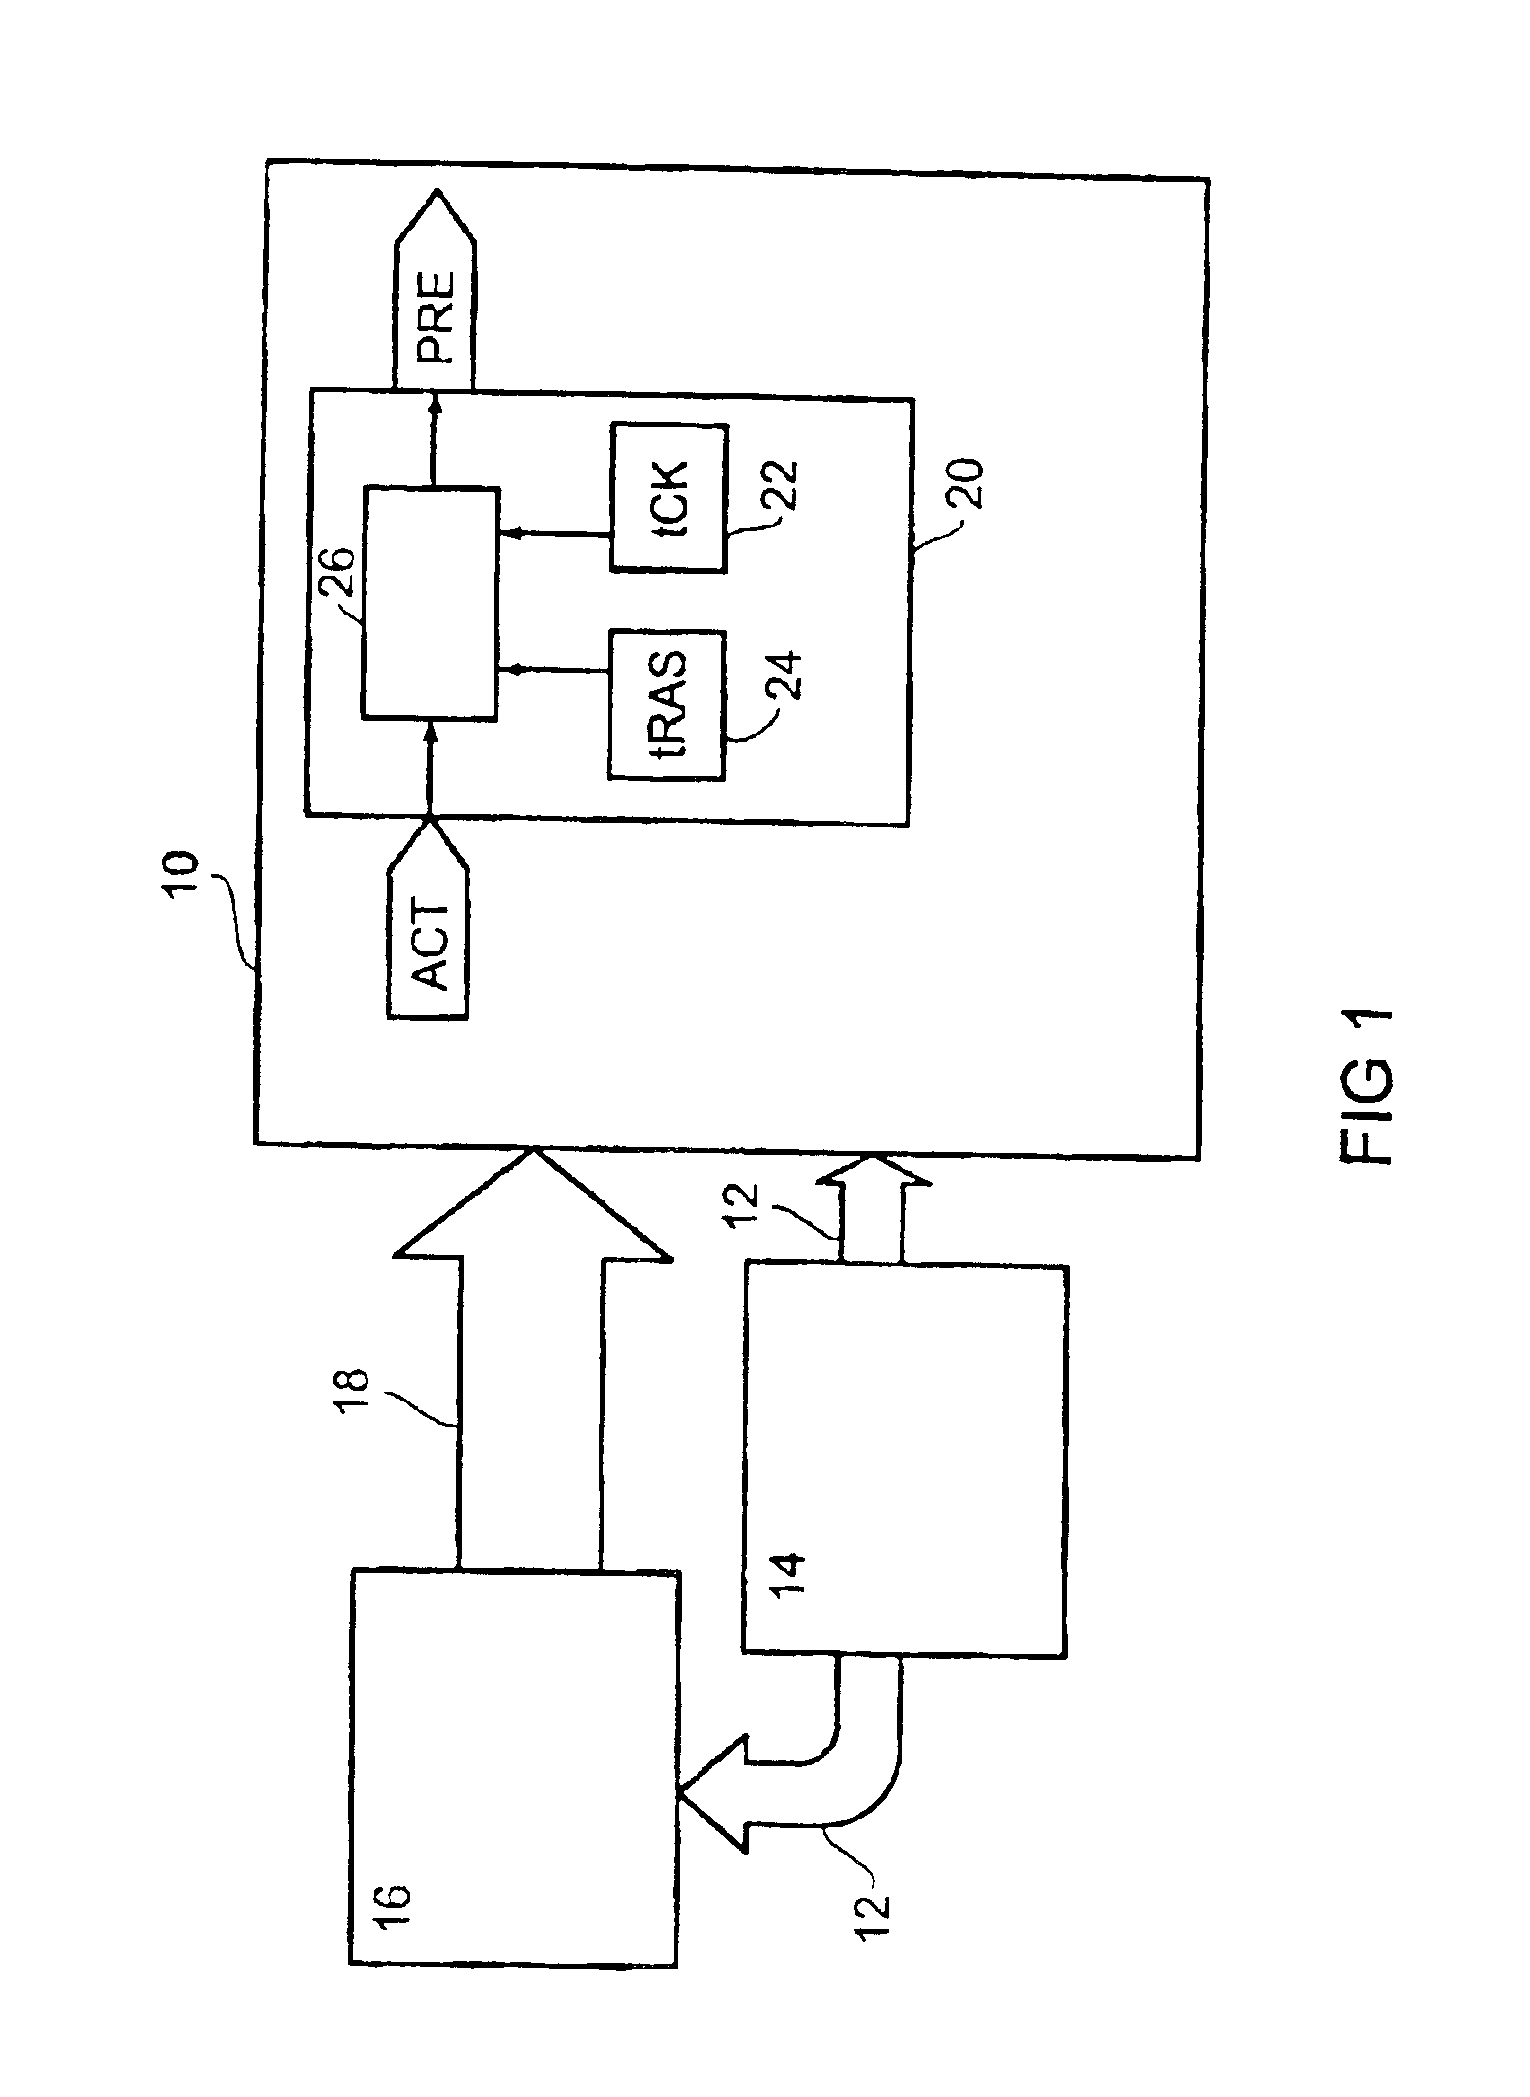 Circuit element with timing control